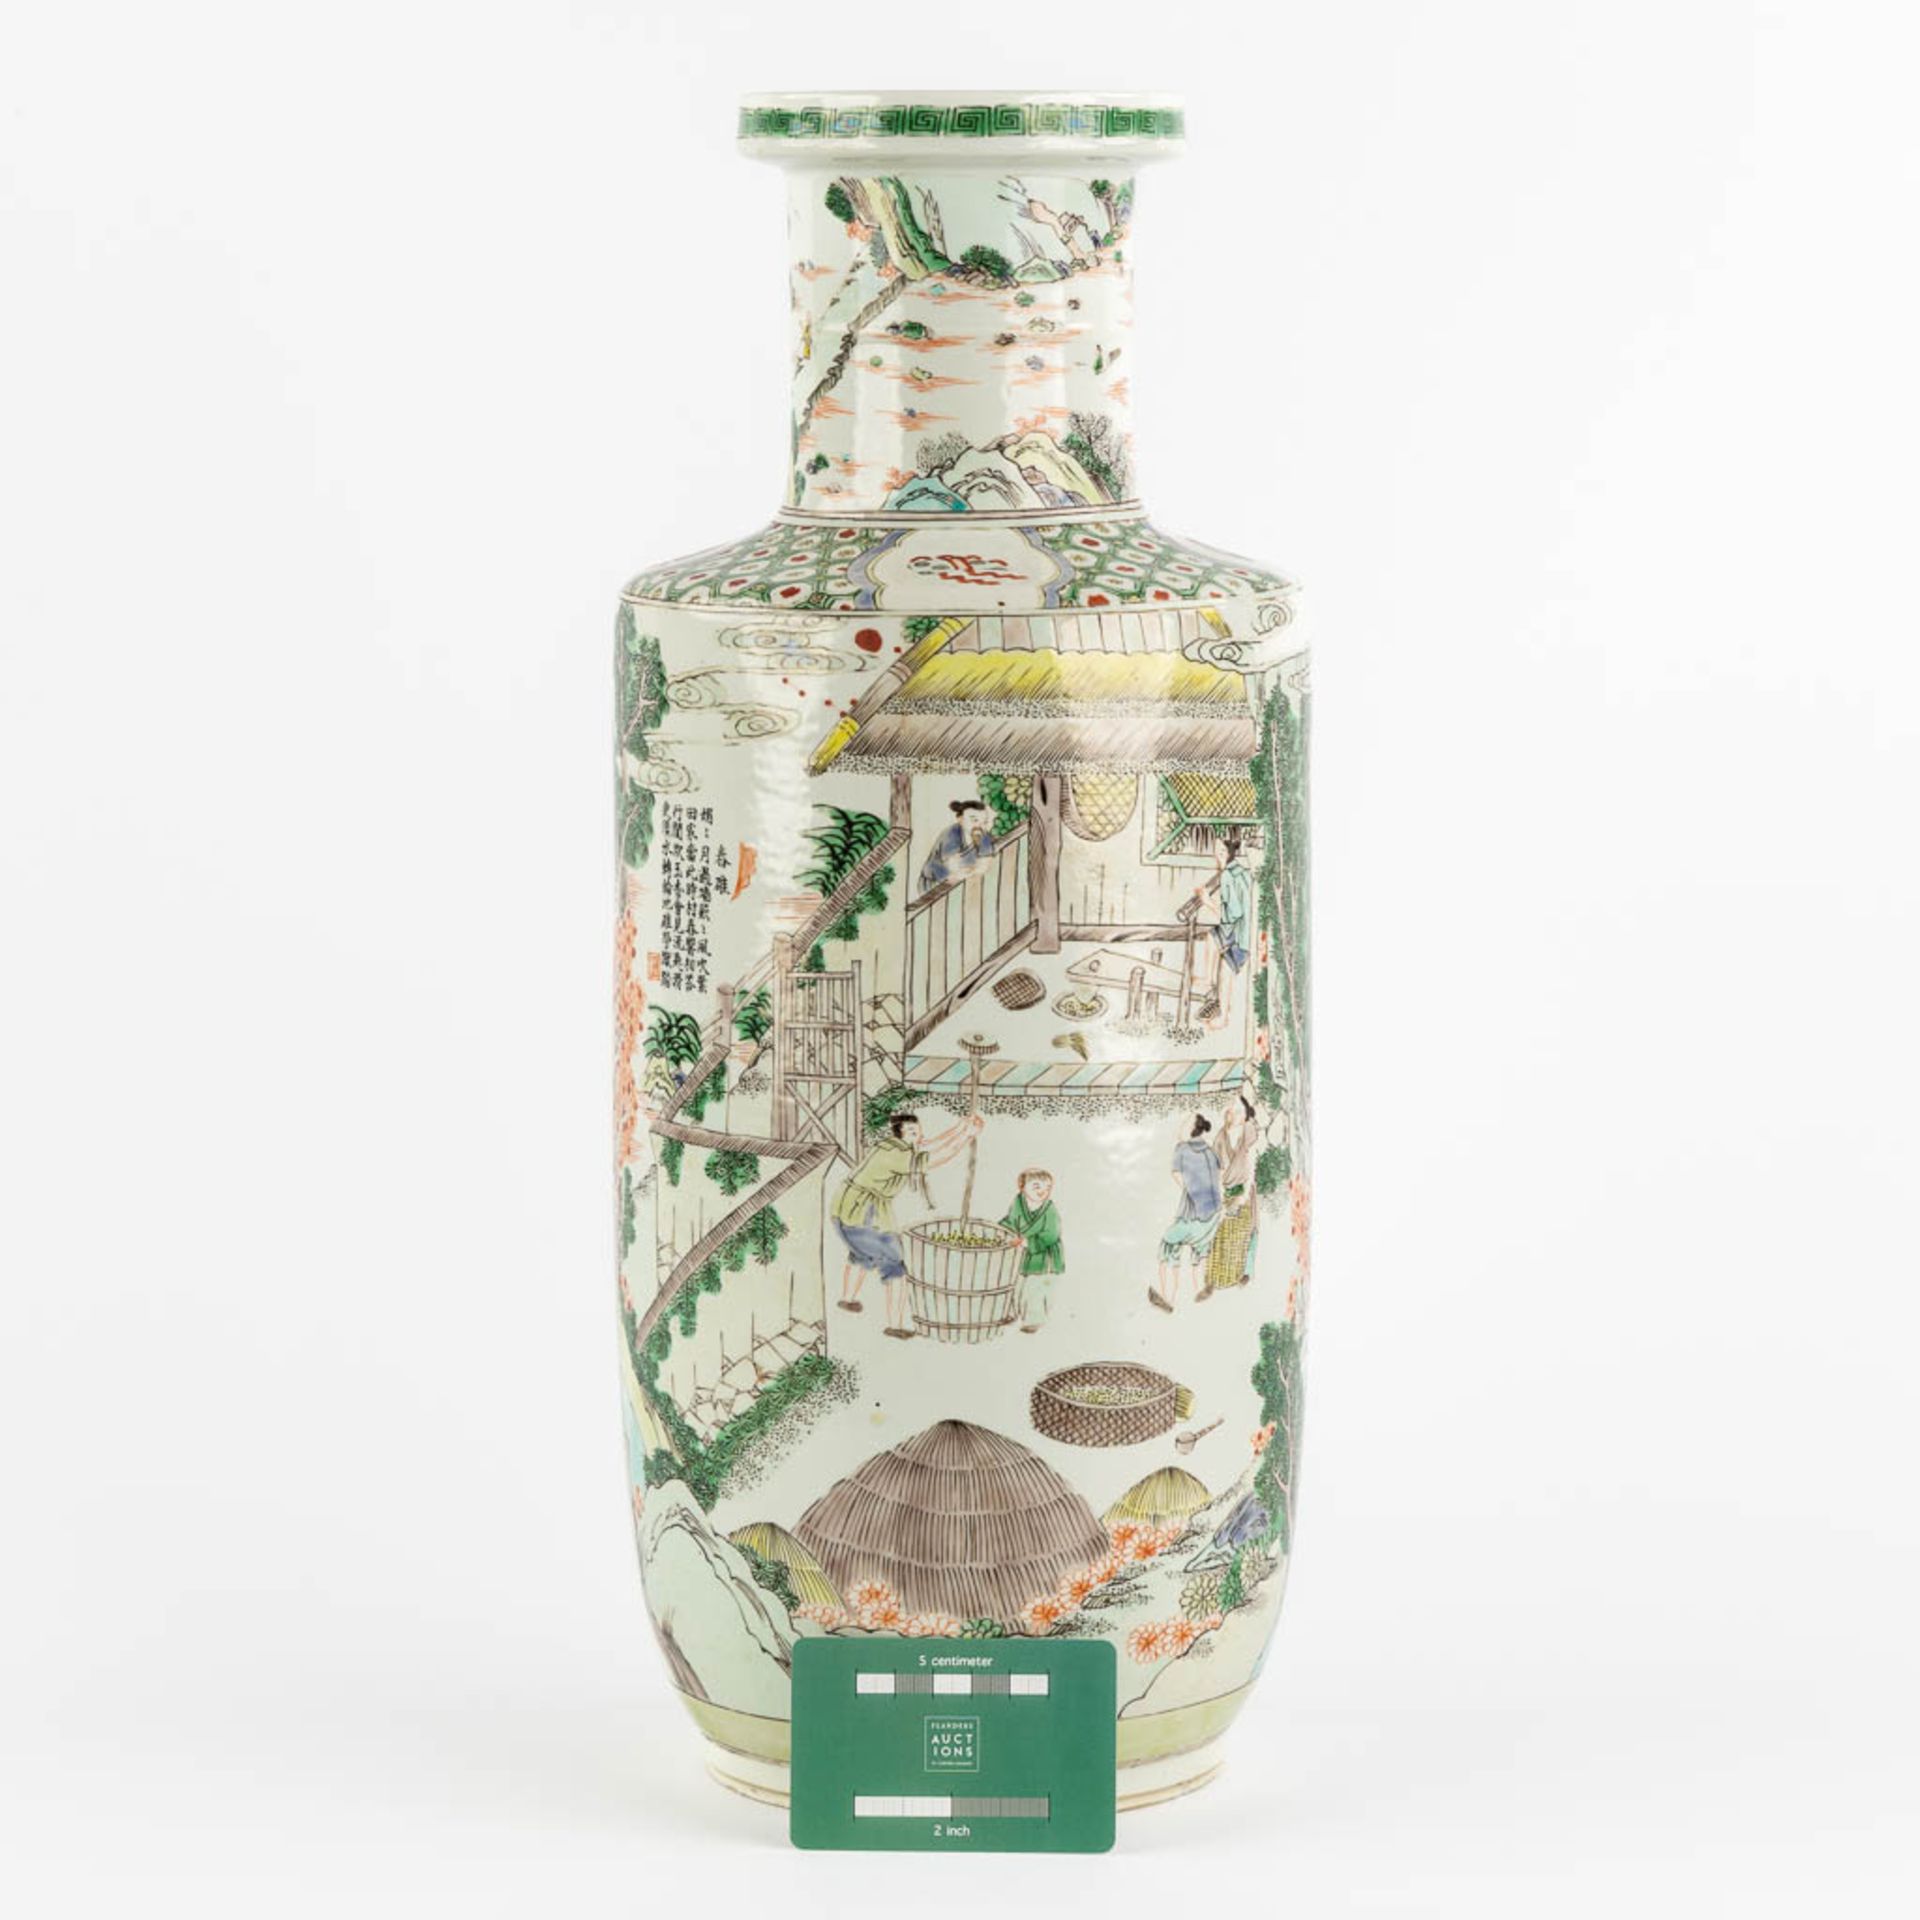 A Chinese Famille Verte 'Roulleau' vase with scènes of rice production. (H:46 x D:18 cm) - Image 2 of 13